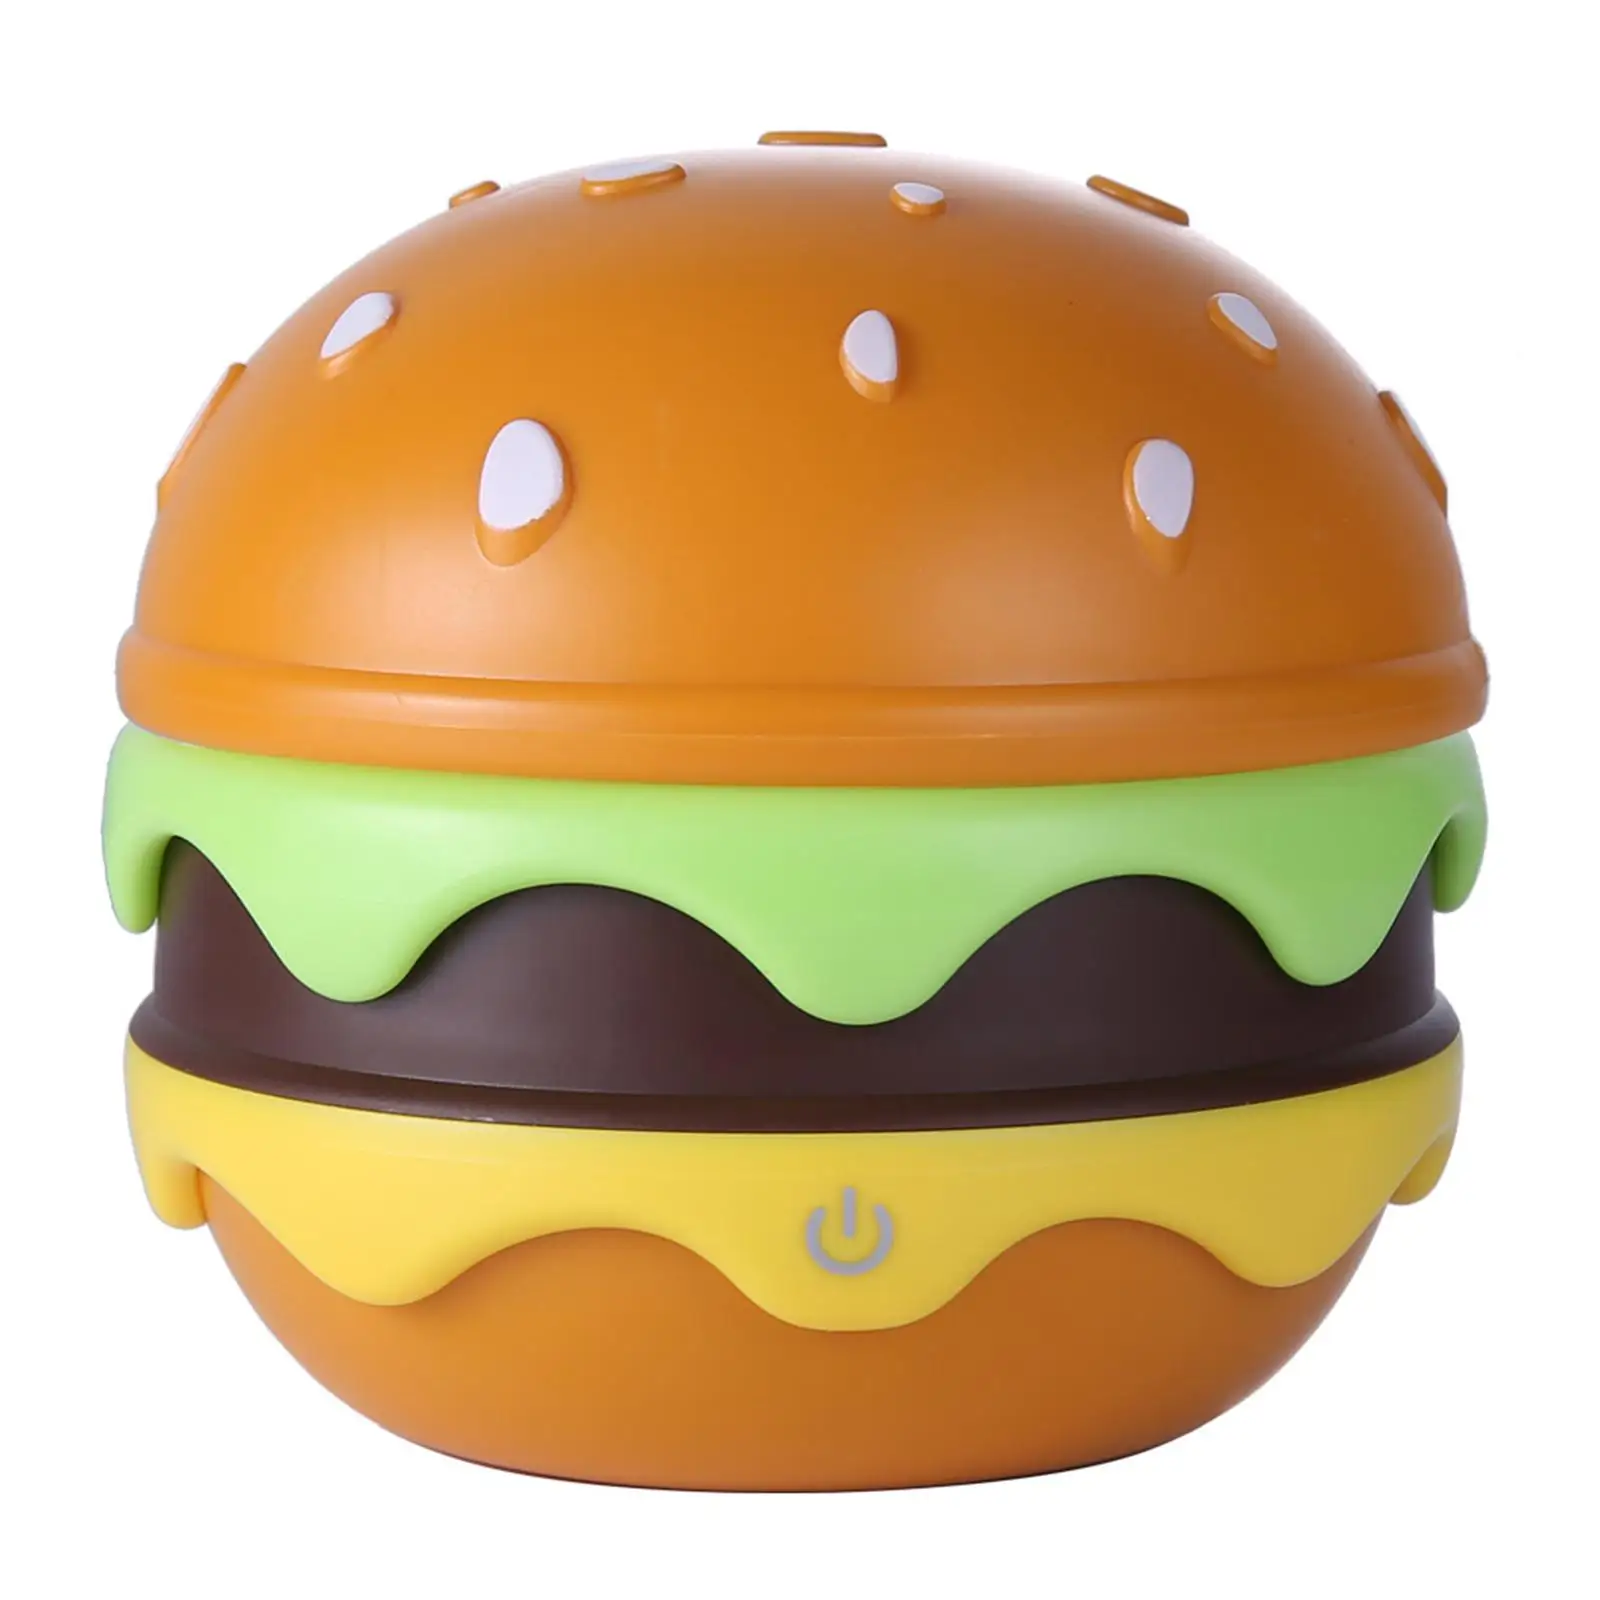 Hamburger Table Lamp Portable Rechargeable Retractable Dimmable Nursery Night Light Kids Lamp for Study Bedroom Office Home Gift